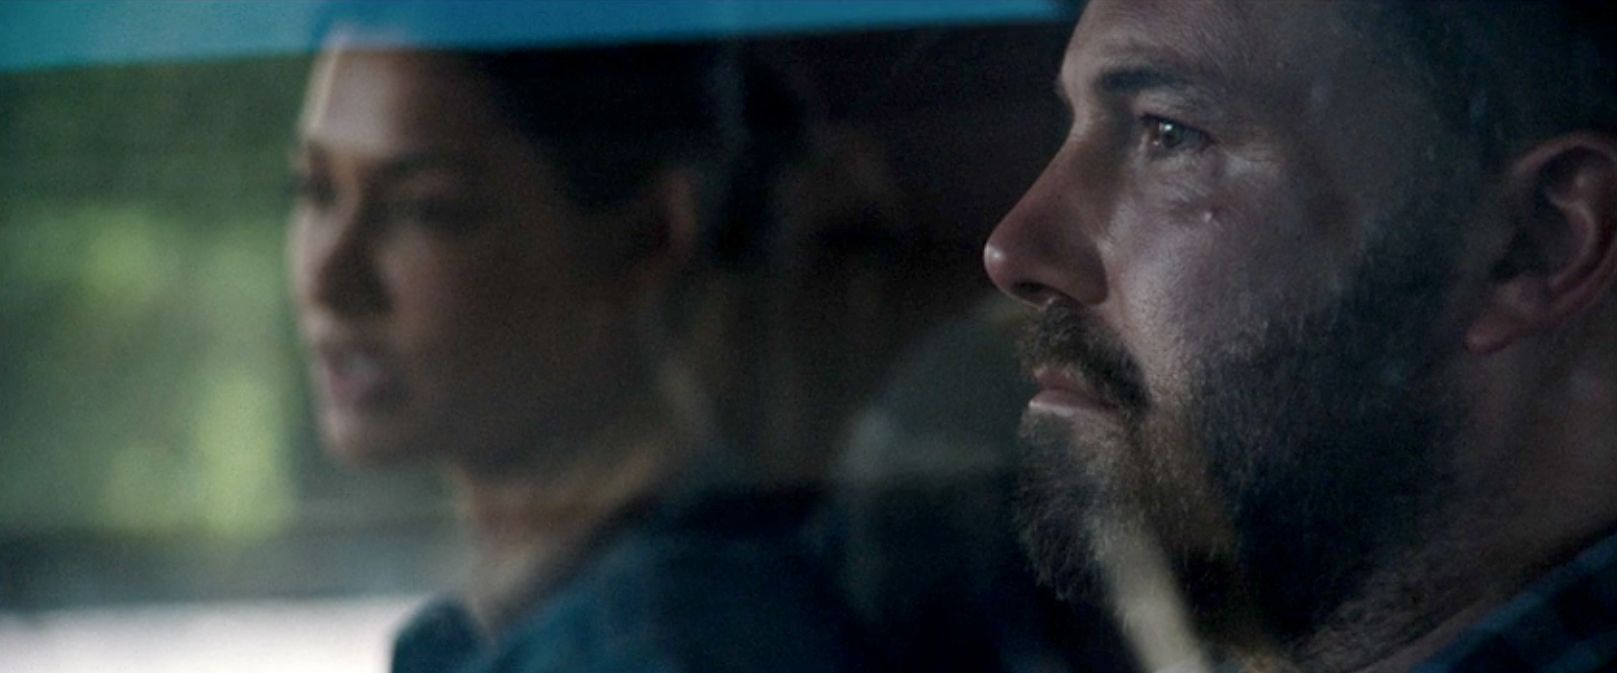 Ben Affleck's Movie 'The Way Back' Is 'Really Important': Trailer